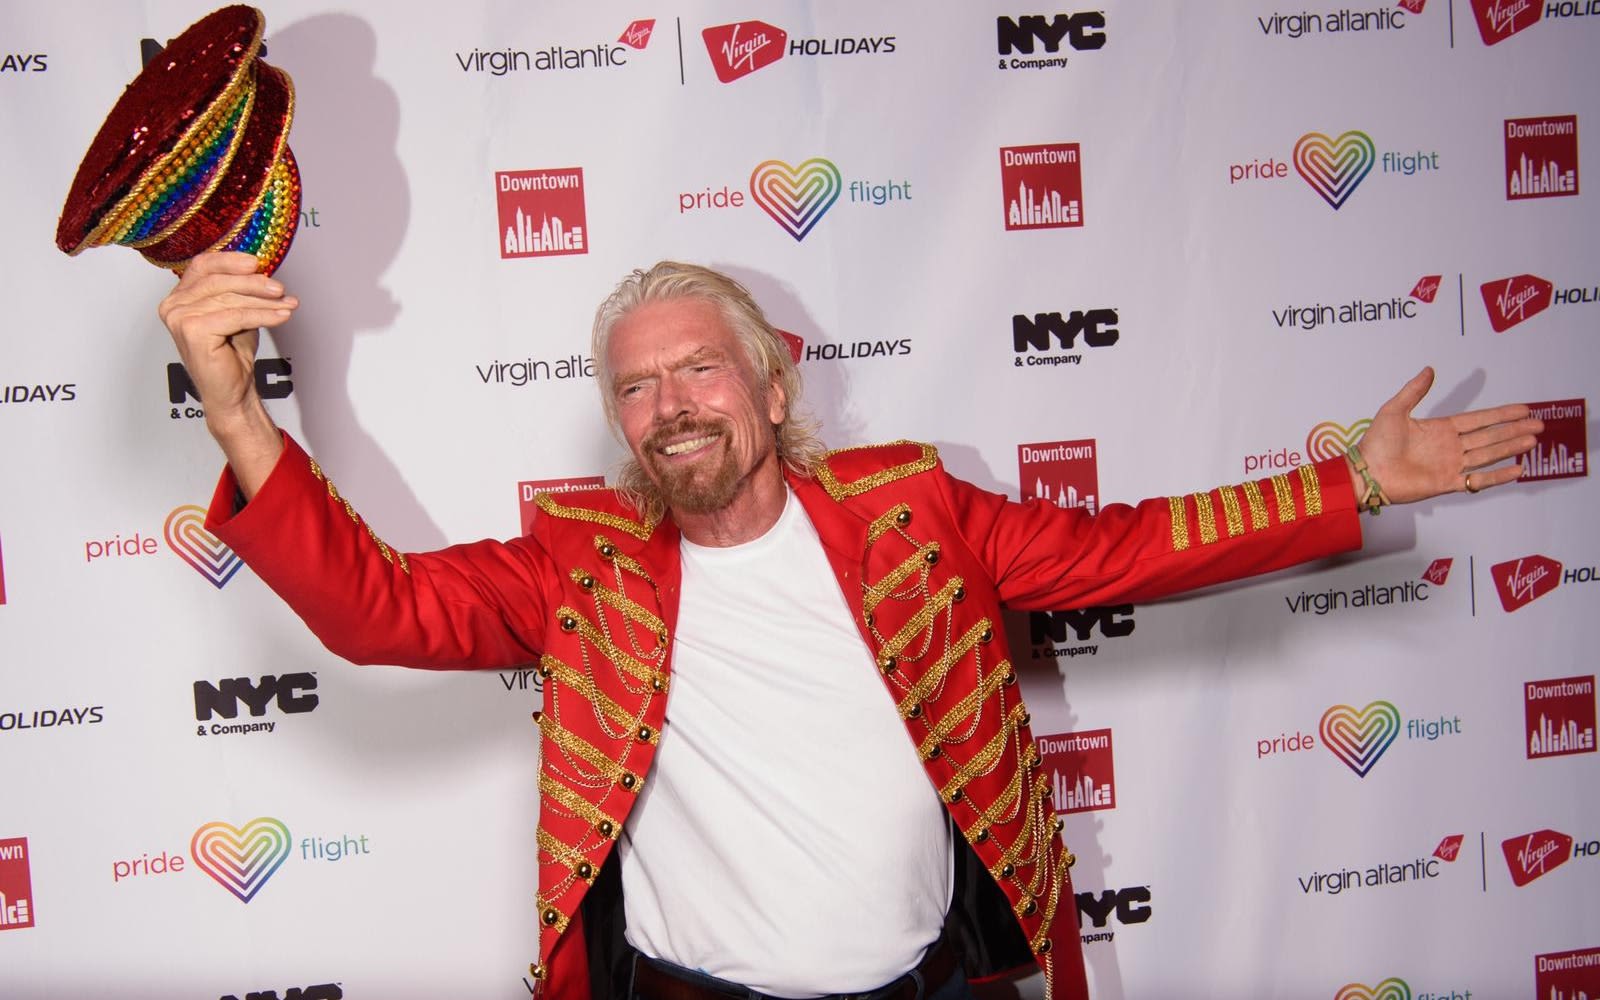 Richard Branson smiling, waving his hat and arms in the air at a Virgin Atlantic Pride event in New York